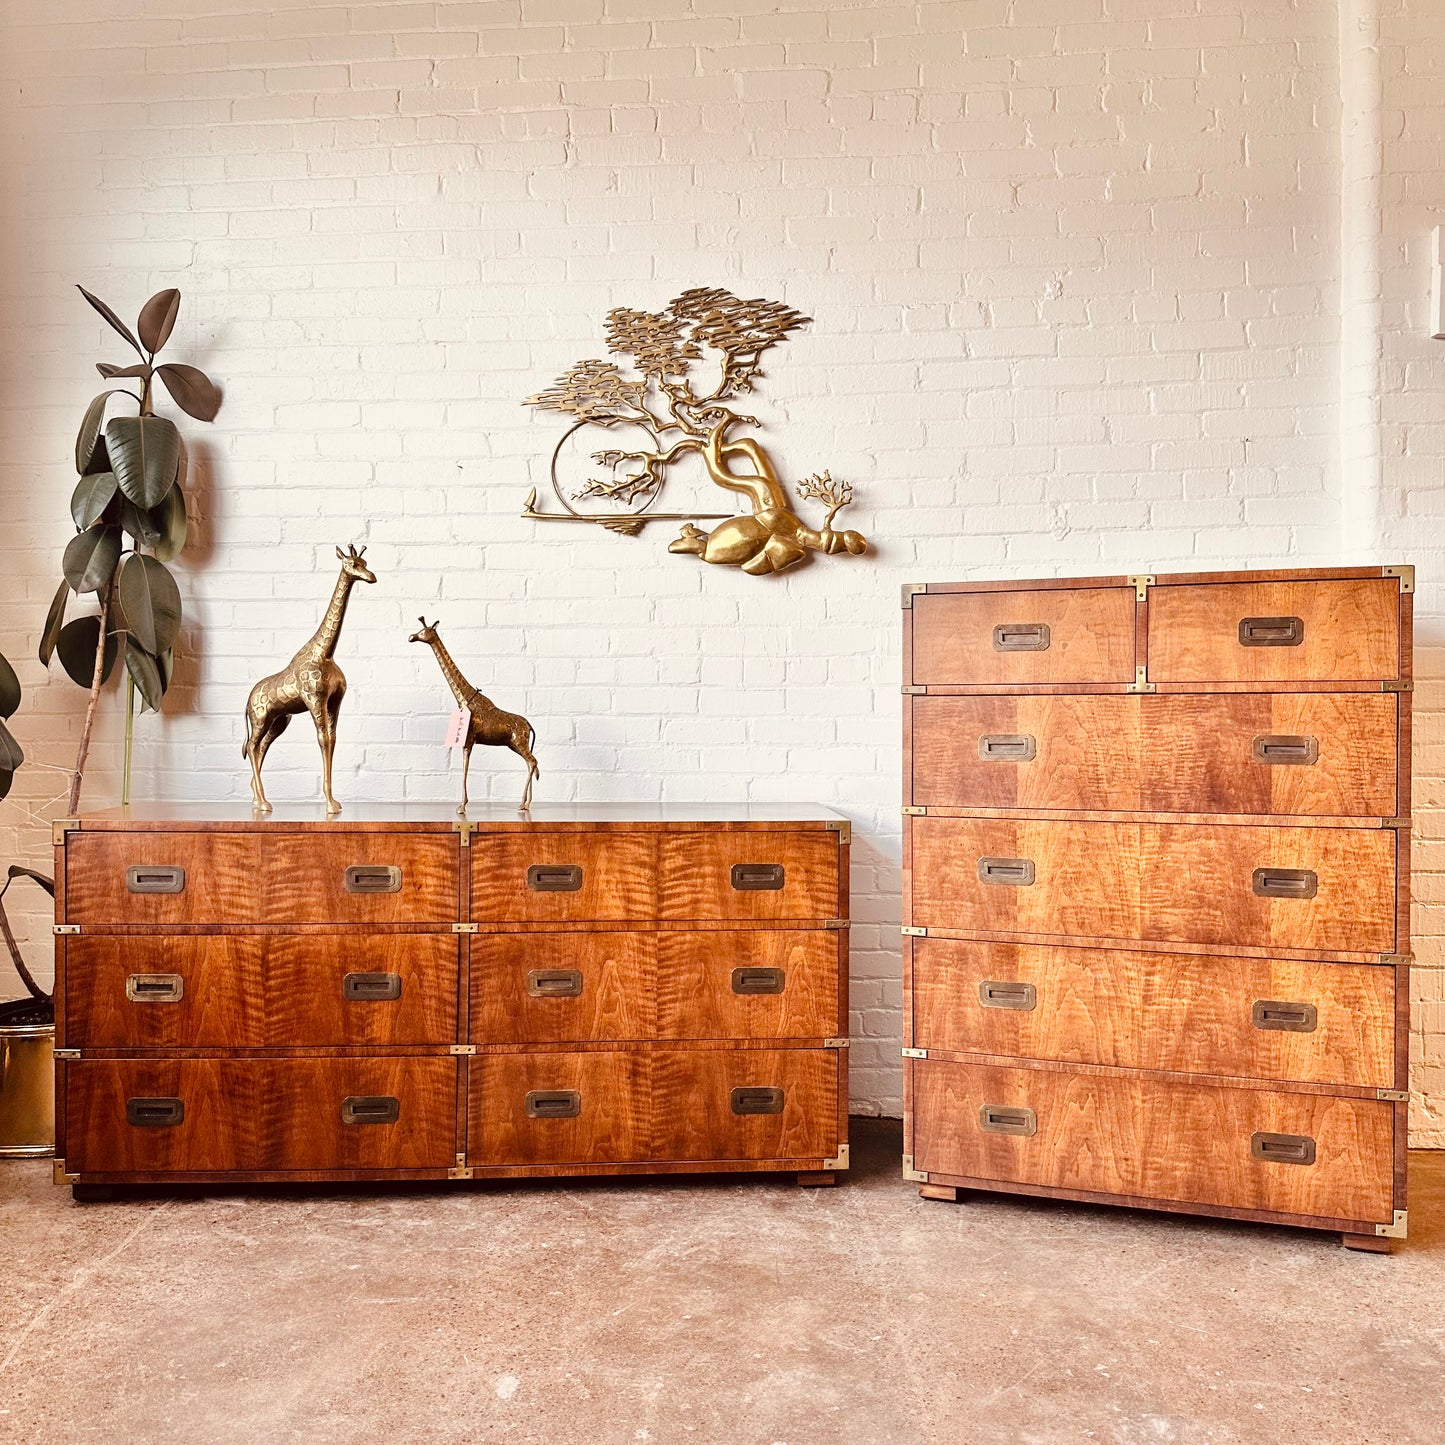 SIX DRAWER DRESSER IN HENREDON CAMPAIGN STYLE